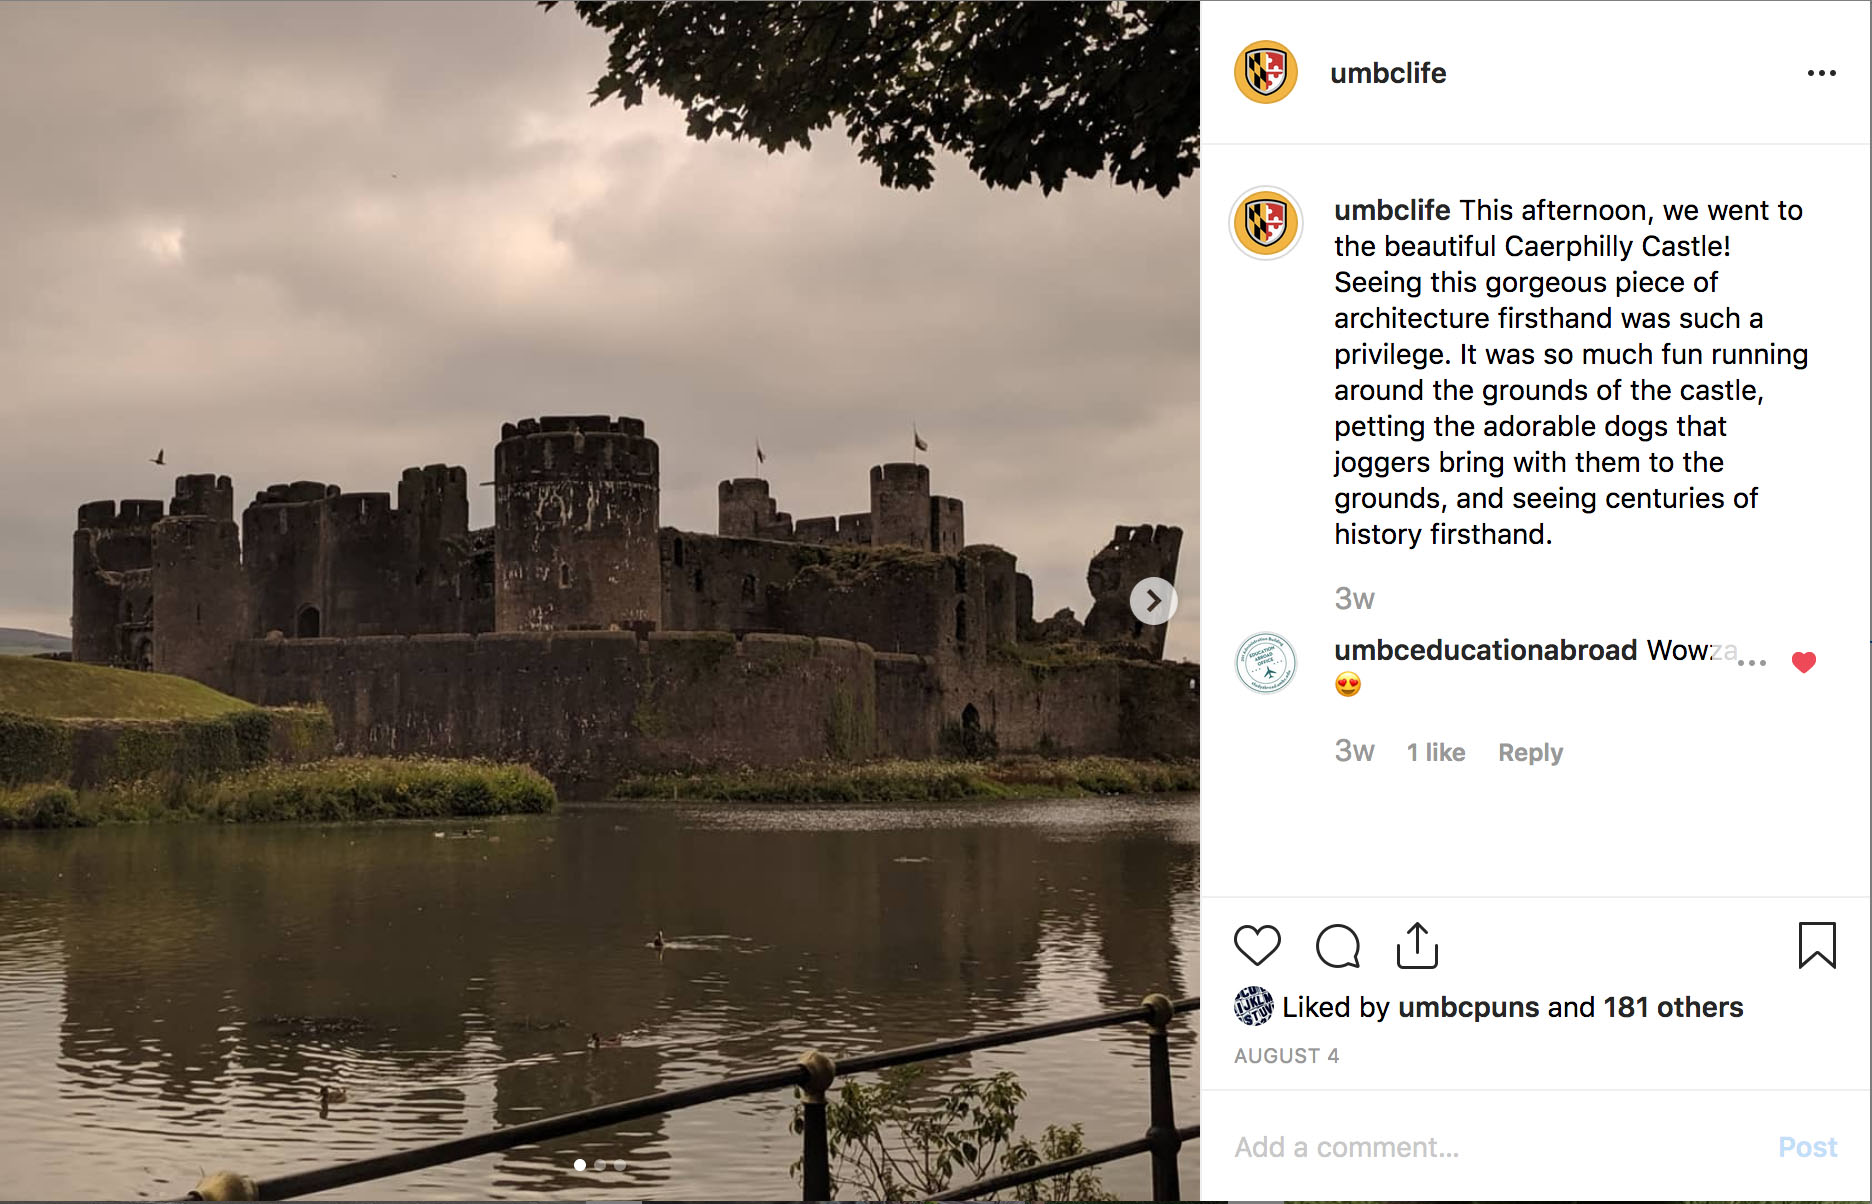 Screenshot of Umbc life Instagram post with Caerphilly Castle